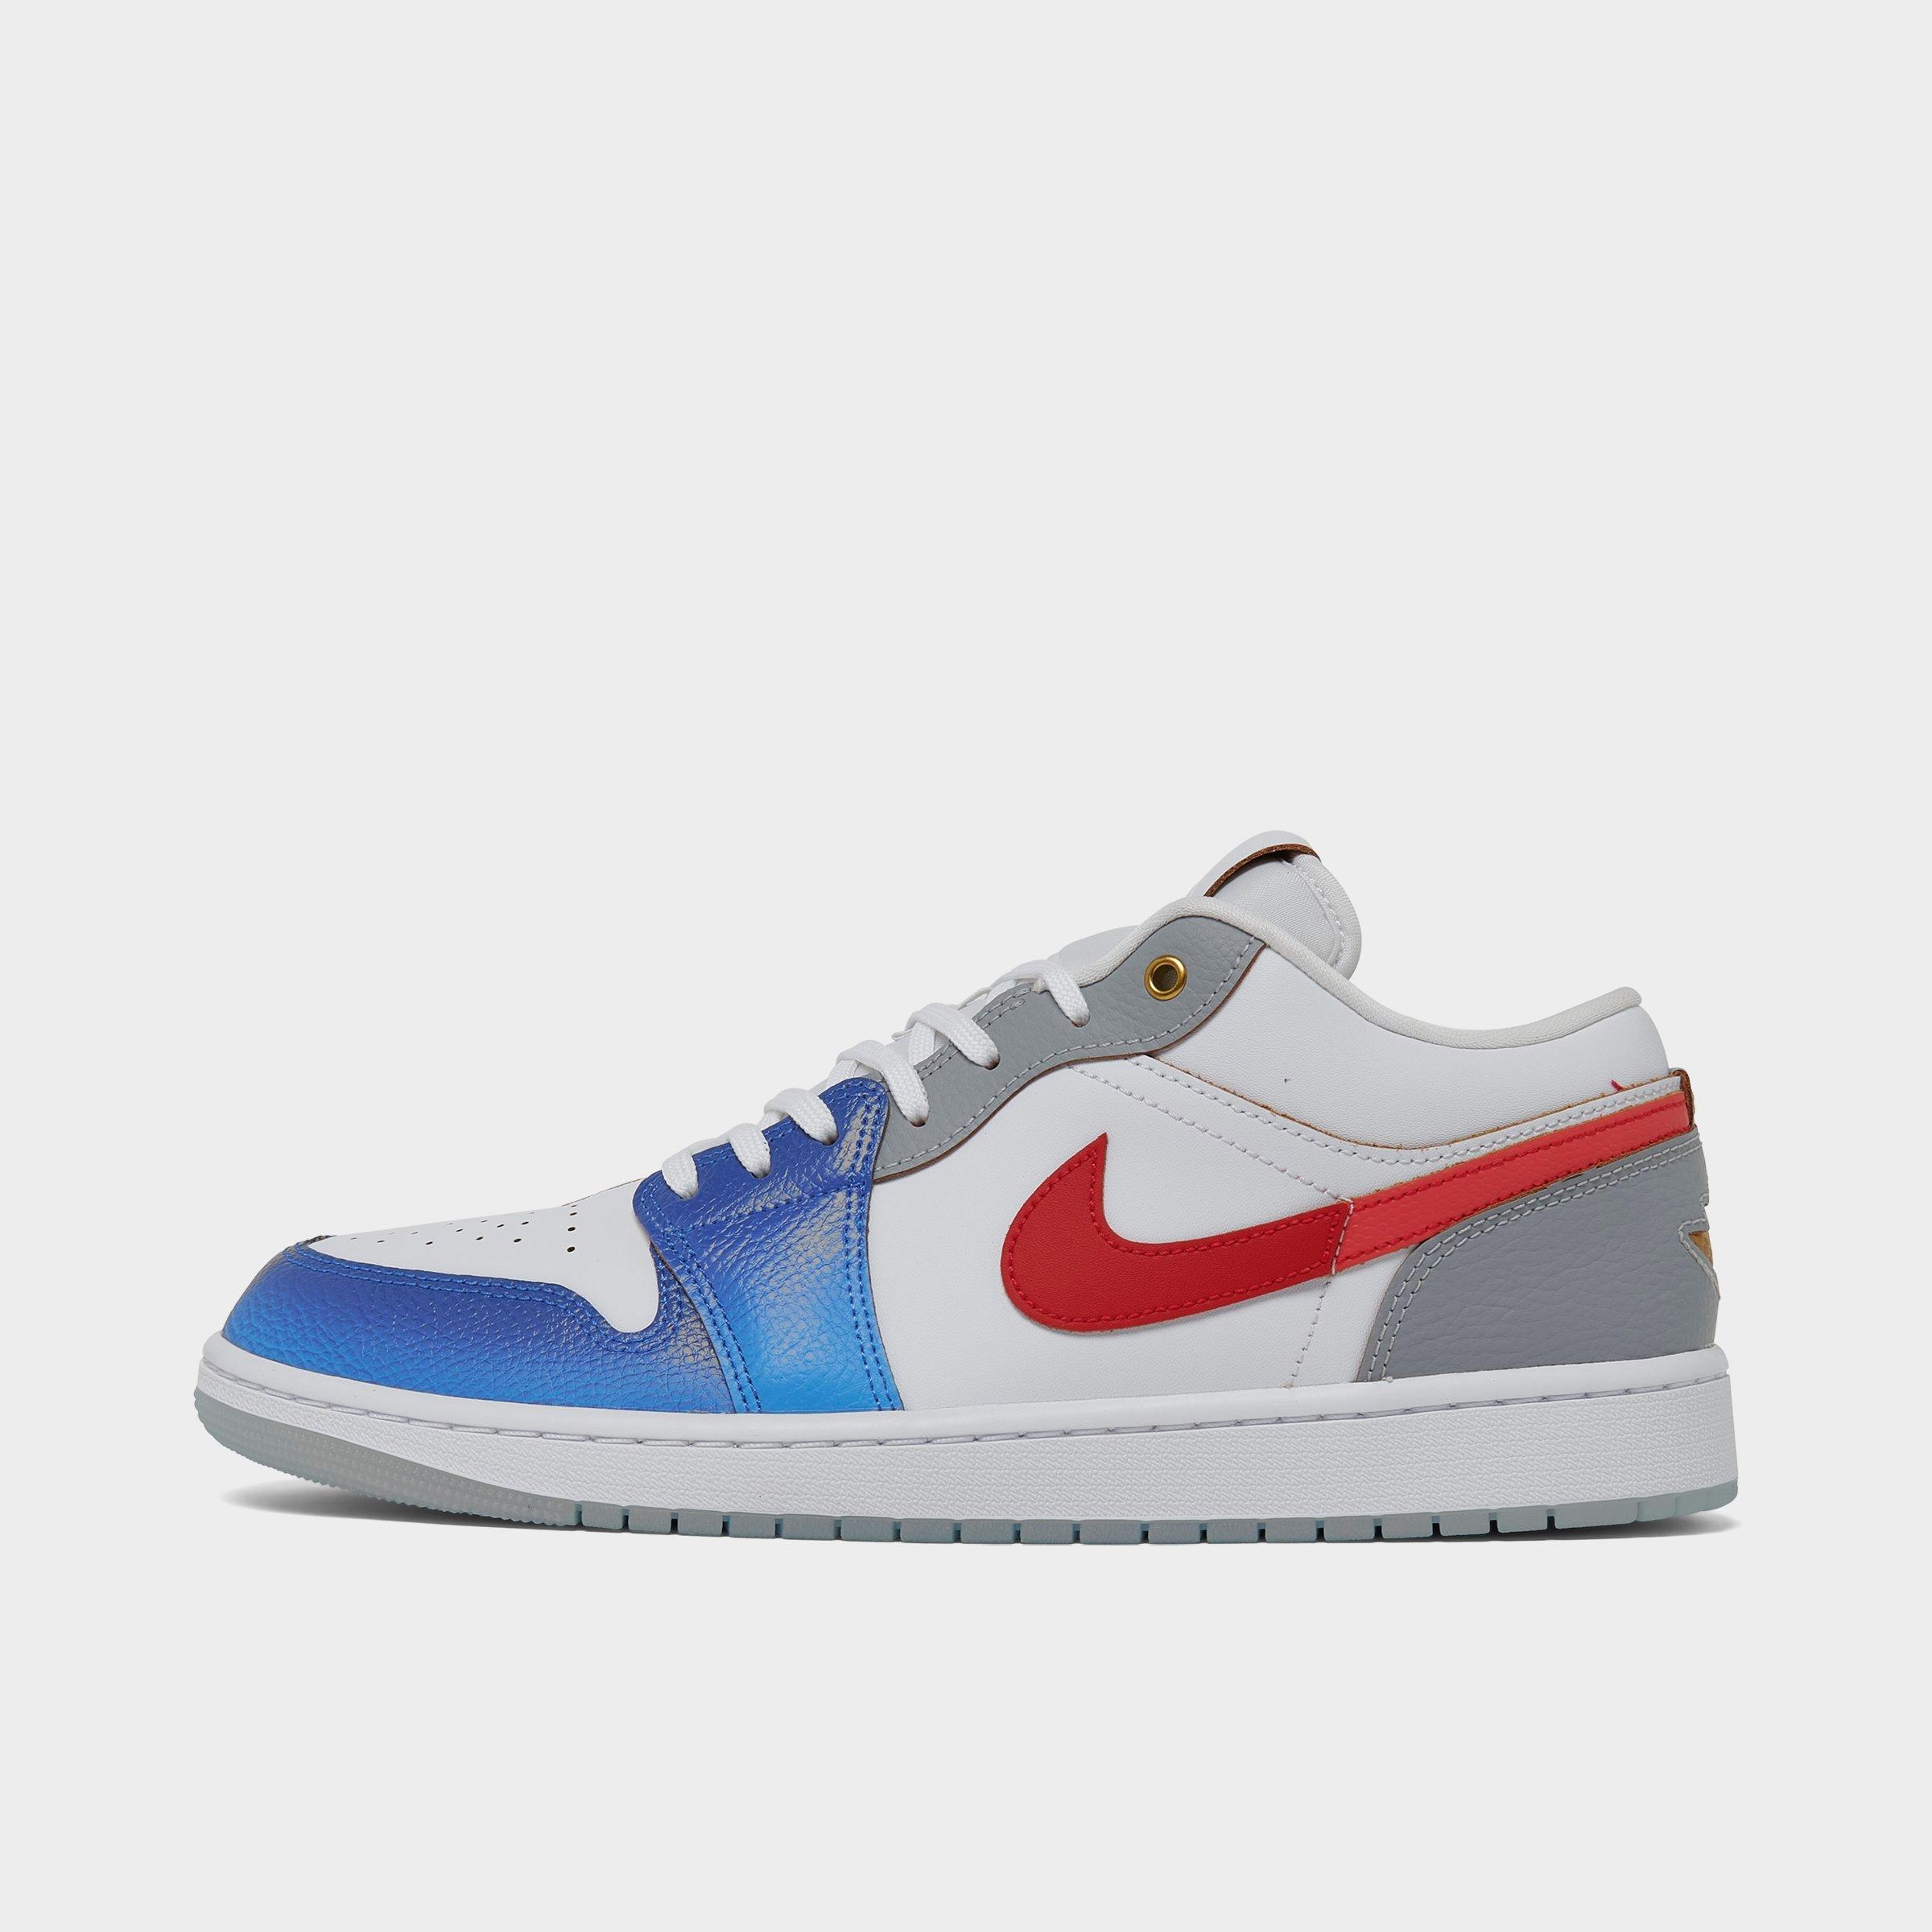 Nike Air Jordan Retro 1 Low Se Casual Shoes In White/game Royal/ice Blue/university Red